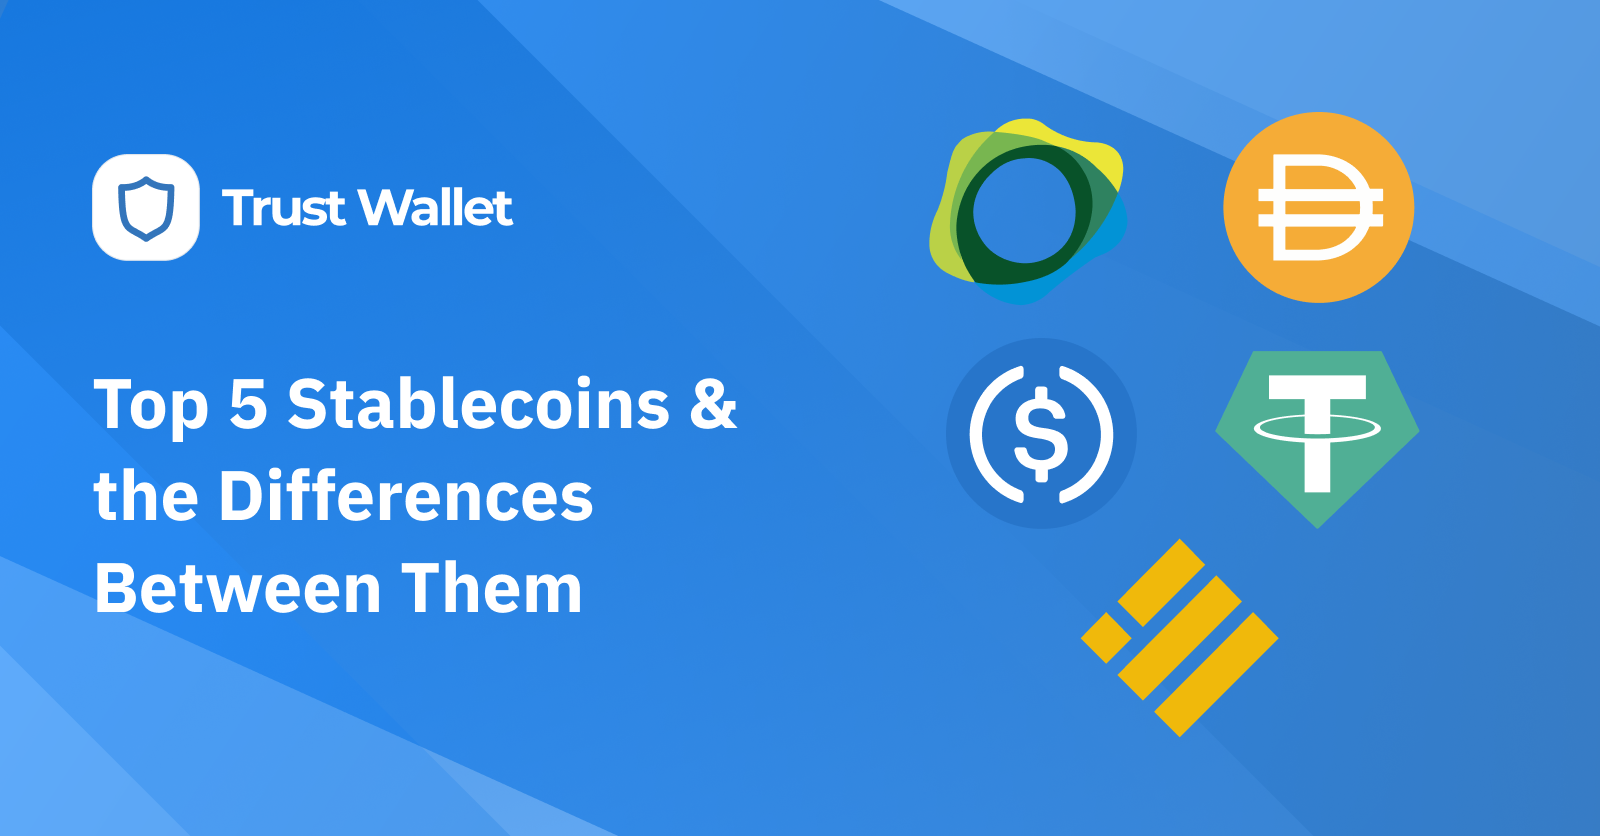 Top 5 Stablecoins and the Differences Between Them